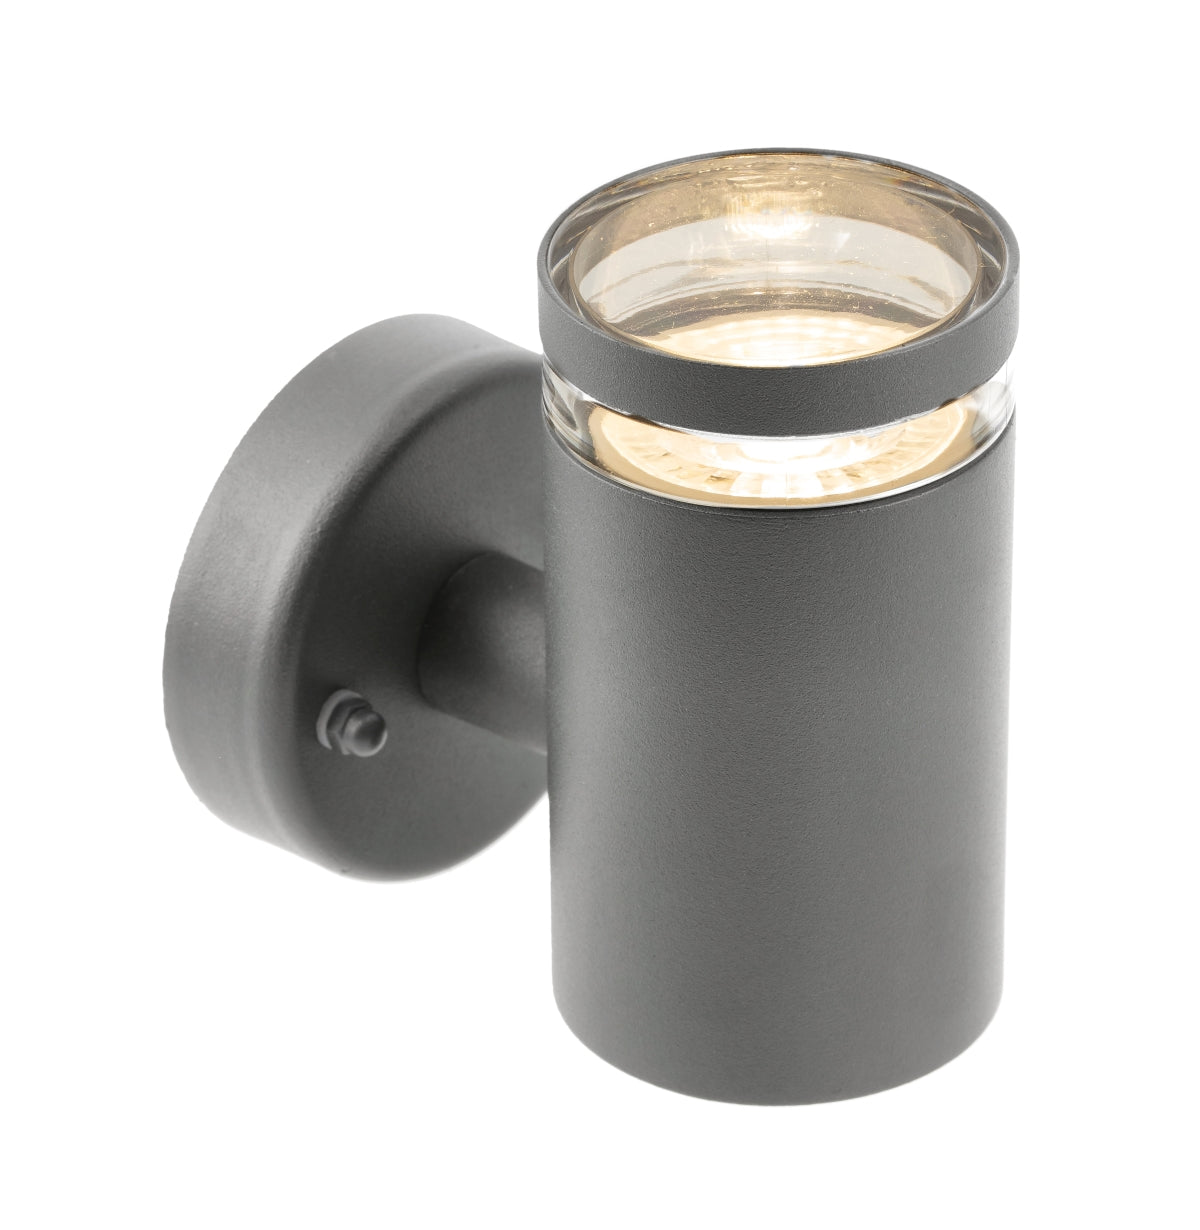 Our Jennifer dark grey outdoor wall mounted cylinder single spot outdoor light would look perfect in a modern or more traditional home design. Outside wall lights can provide atmospheric light in your garden, at the front door or on the terrace as well as a great security solution. It is designed for durability and longevity with its robust material producing a fully weatherproof and water resistant light fitting.